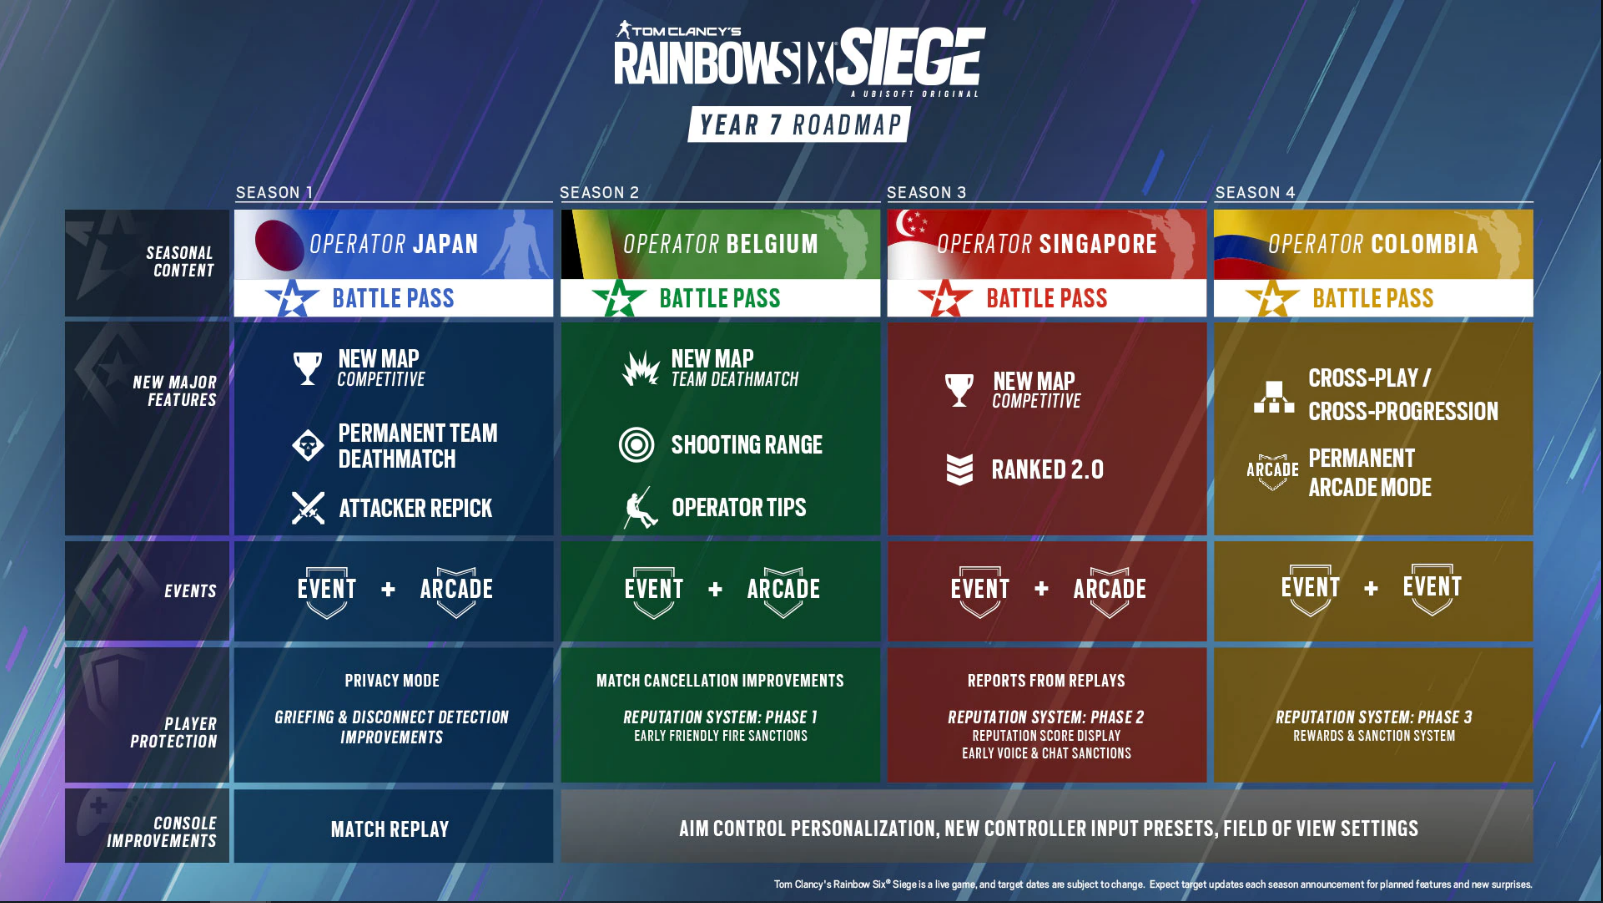 R6 Siege new season release date, operator, and map — SiegeGG